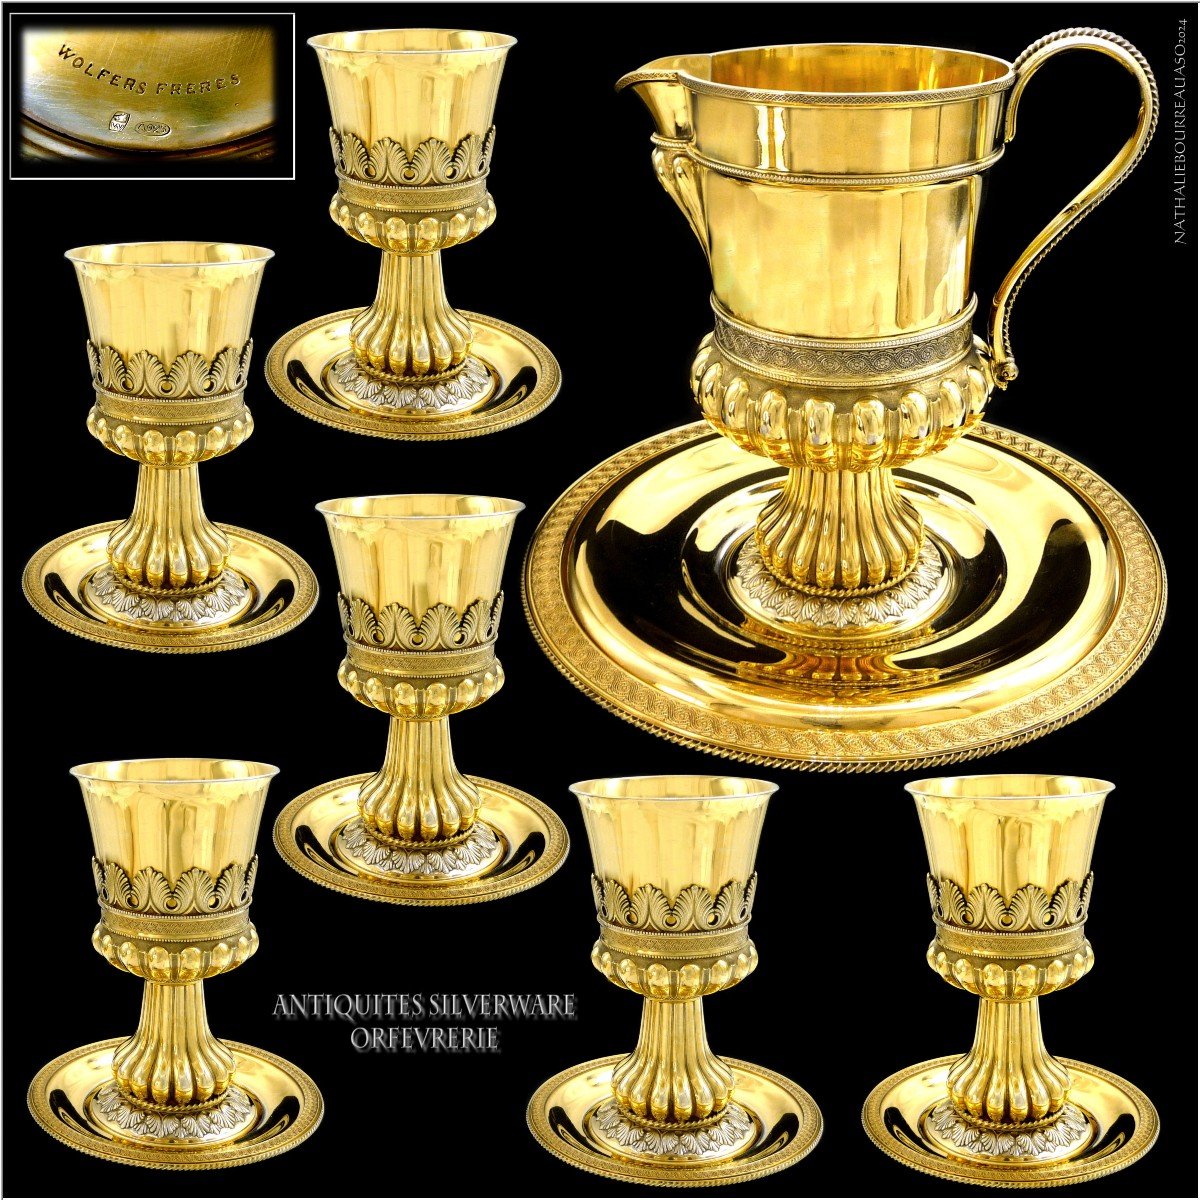 Wolfers Frères - Brussels Important Beer Service Sterling Silver & Vermeil - 14 Pc. 8095 Gr.